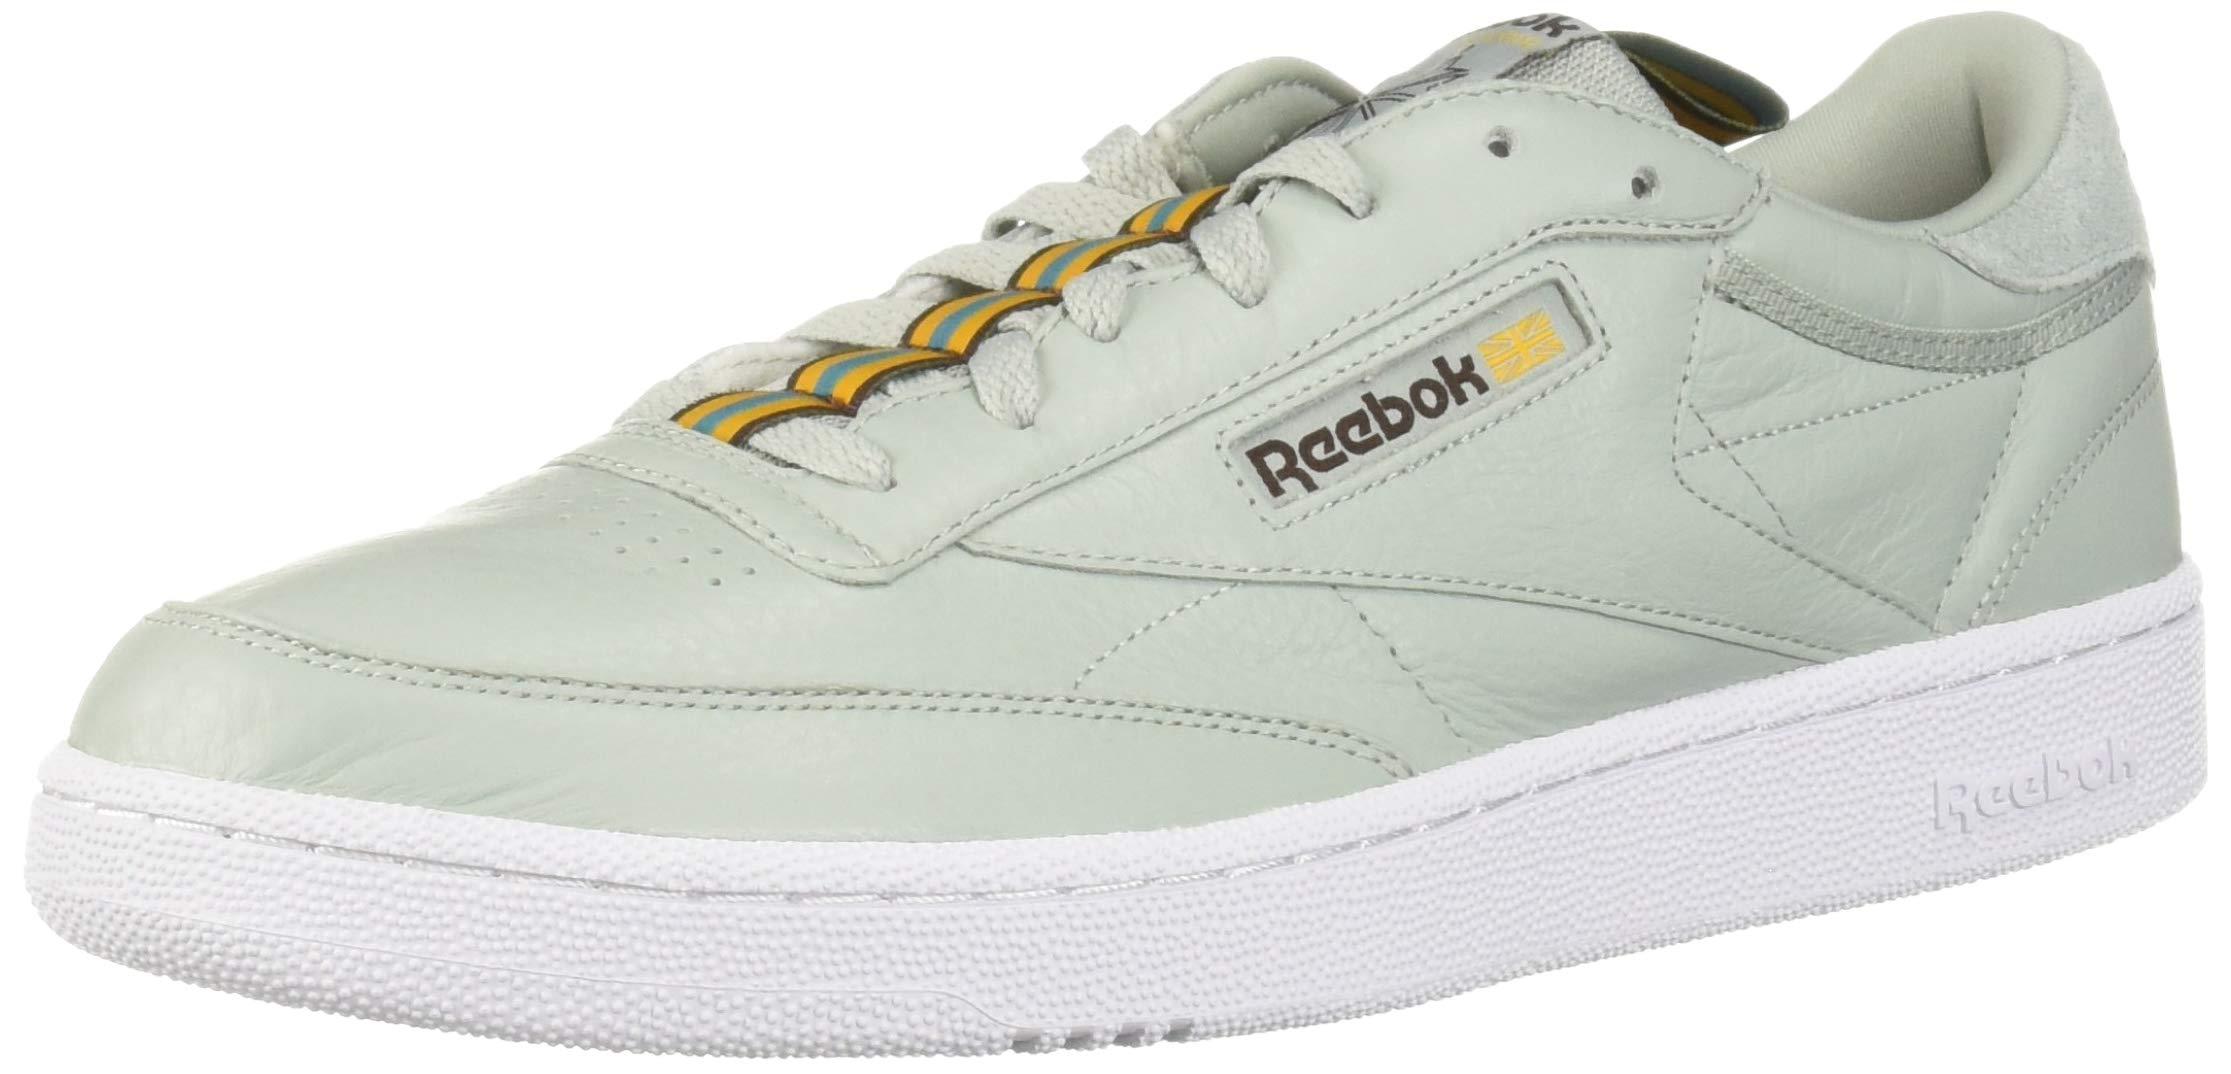 Reebok Leather Club C Sneaker in White for Men - Save 72% - Lyst